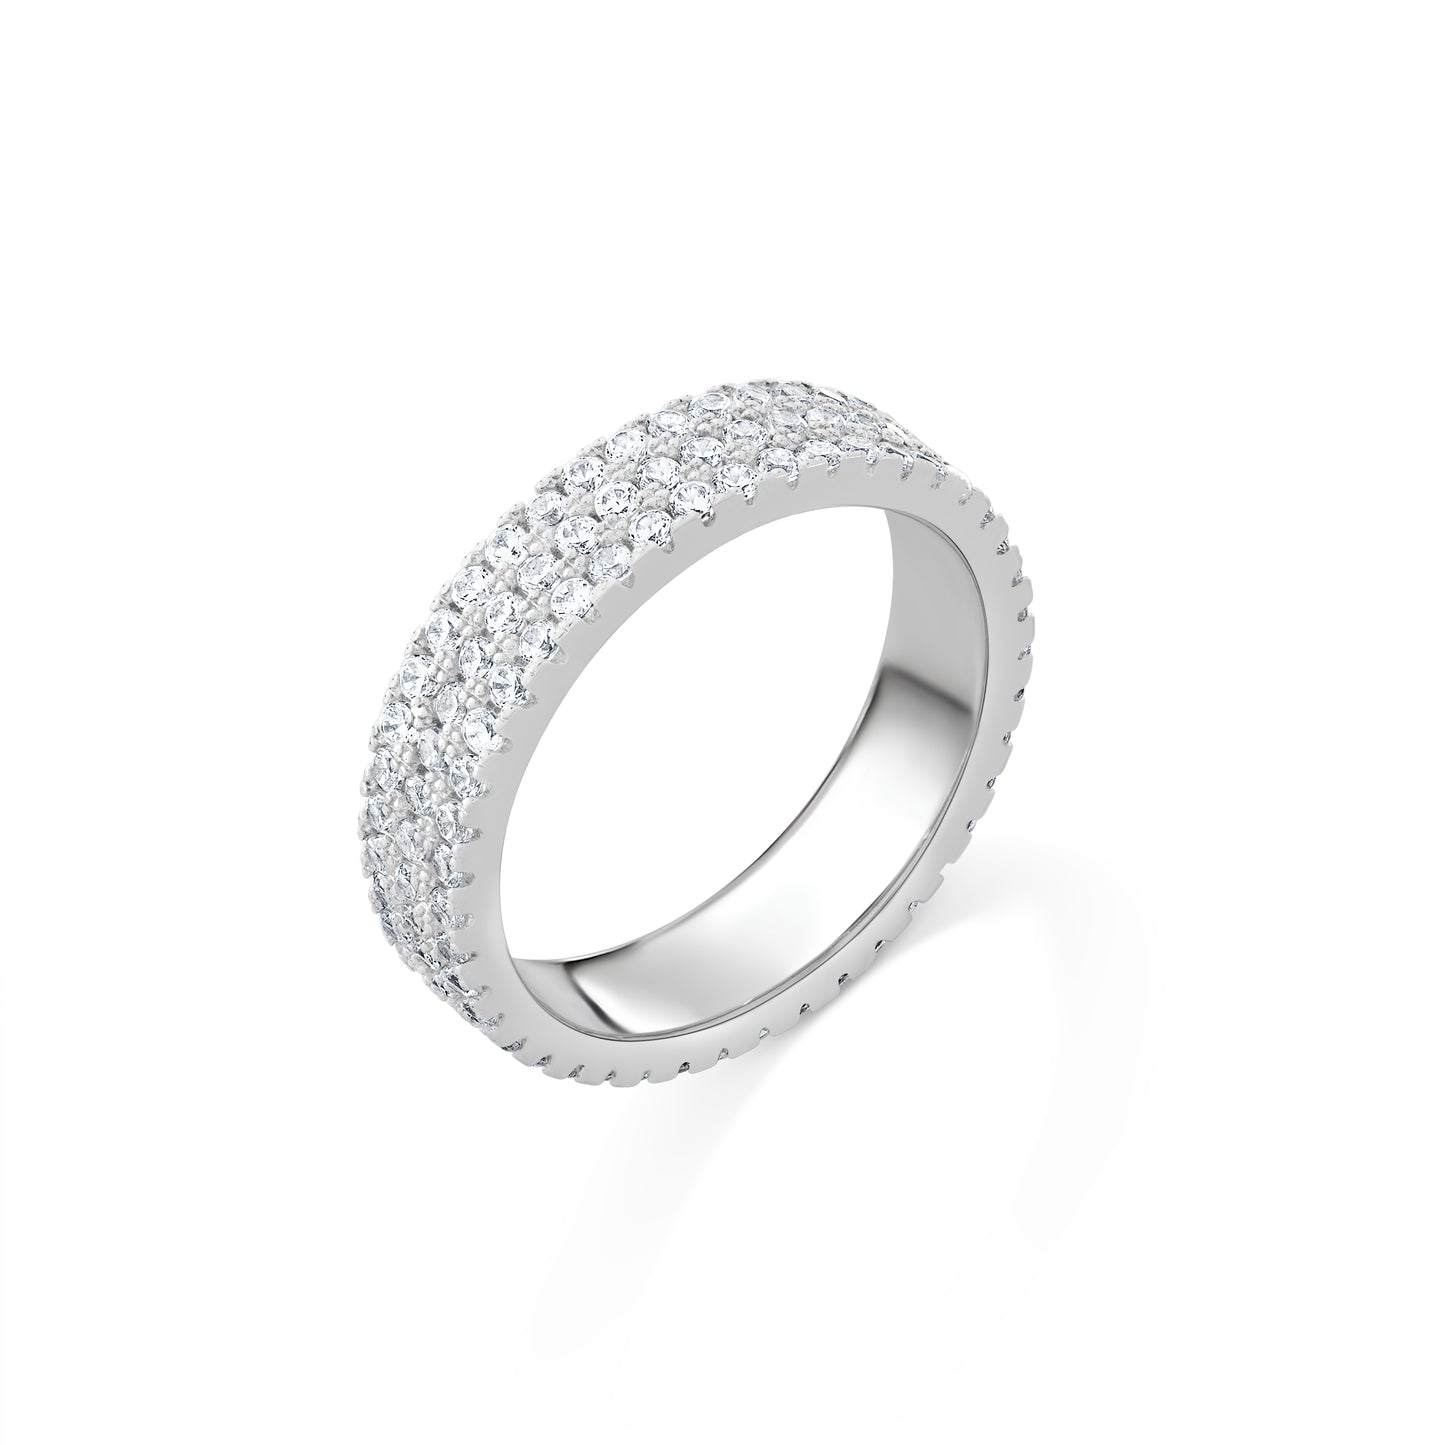 Pave 3 row Cubic Zirconia 925 Sterling Silver Band Ring on a white background